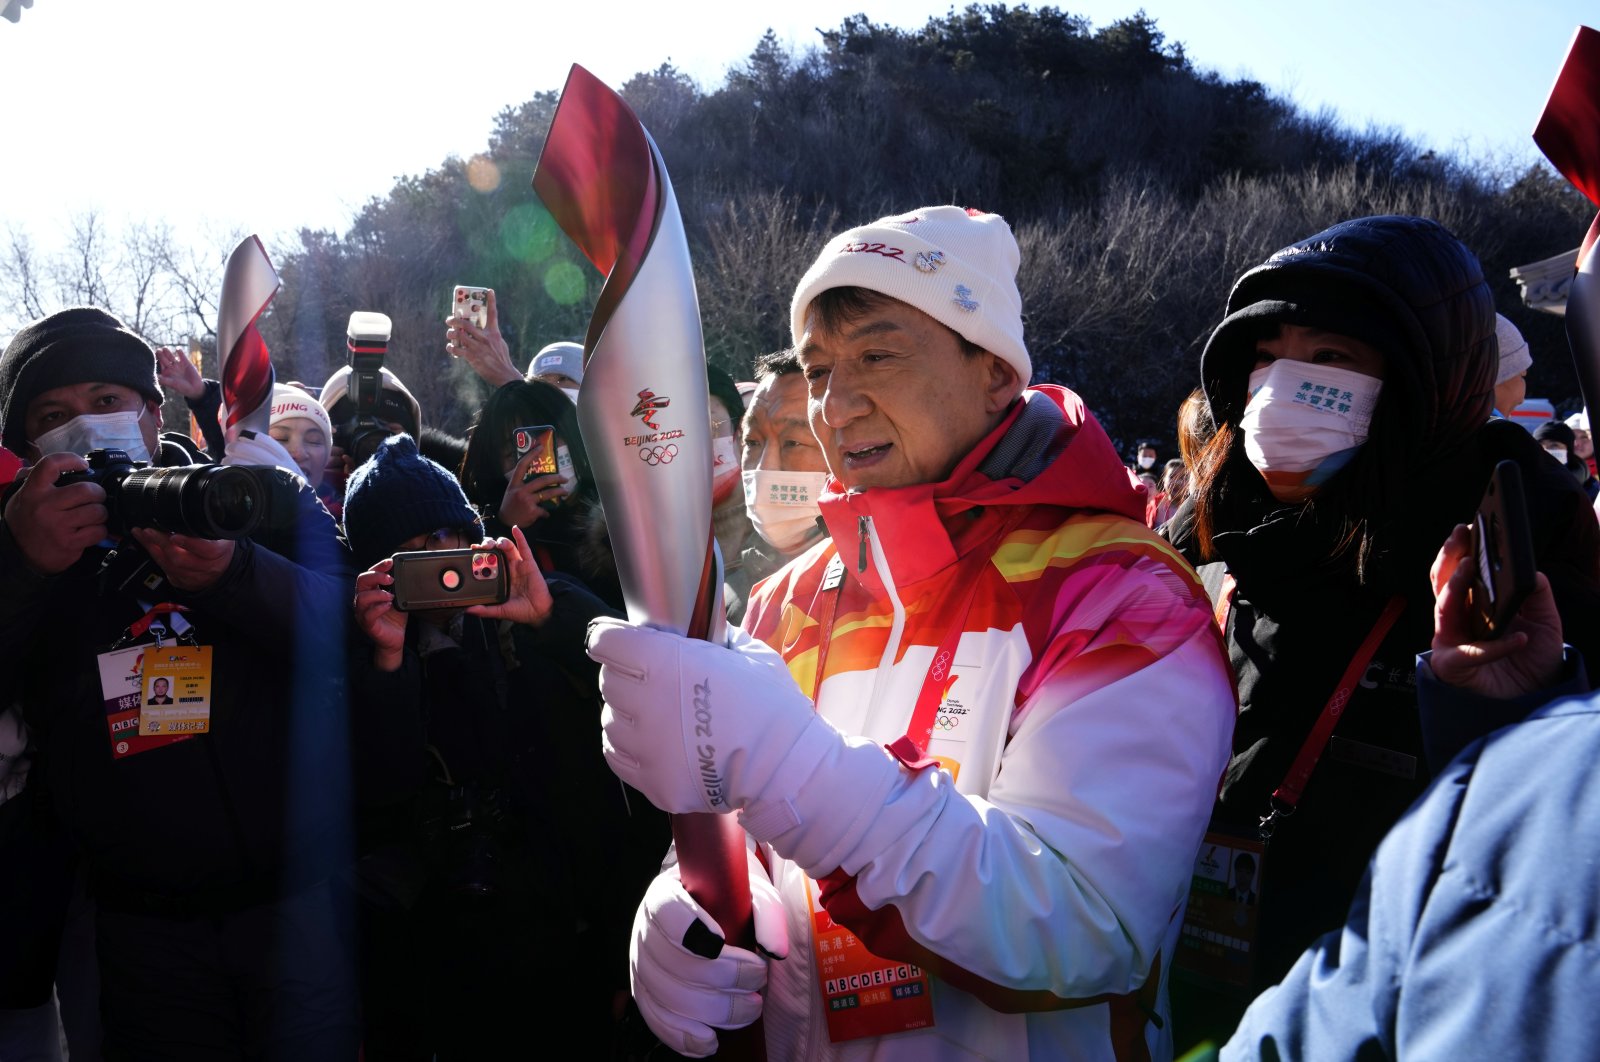 Hong Kong celebrity Jackie Chan holds the 2022 Winter Olympic torch during the torch relay at the Badaling Great Wall on the outskirts of Beijing, China, Feb. 3, 2022. (AP Photo)